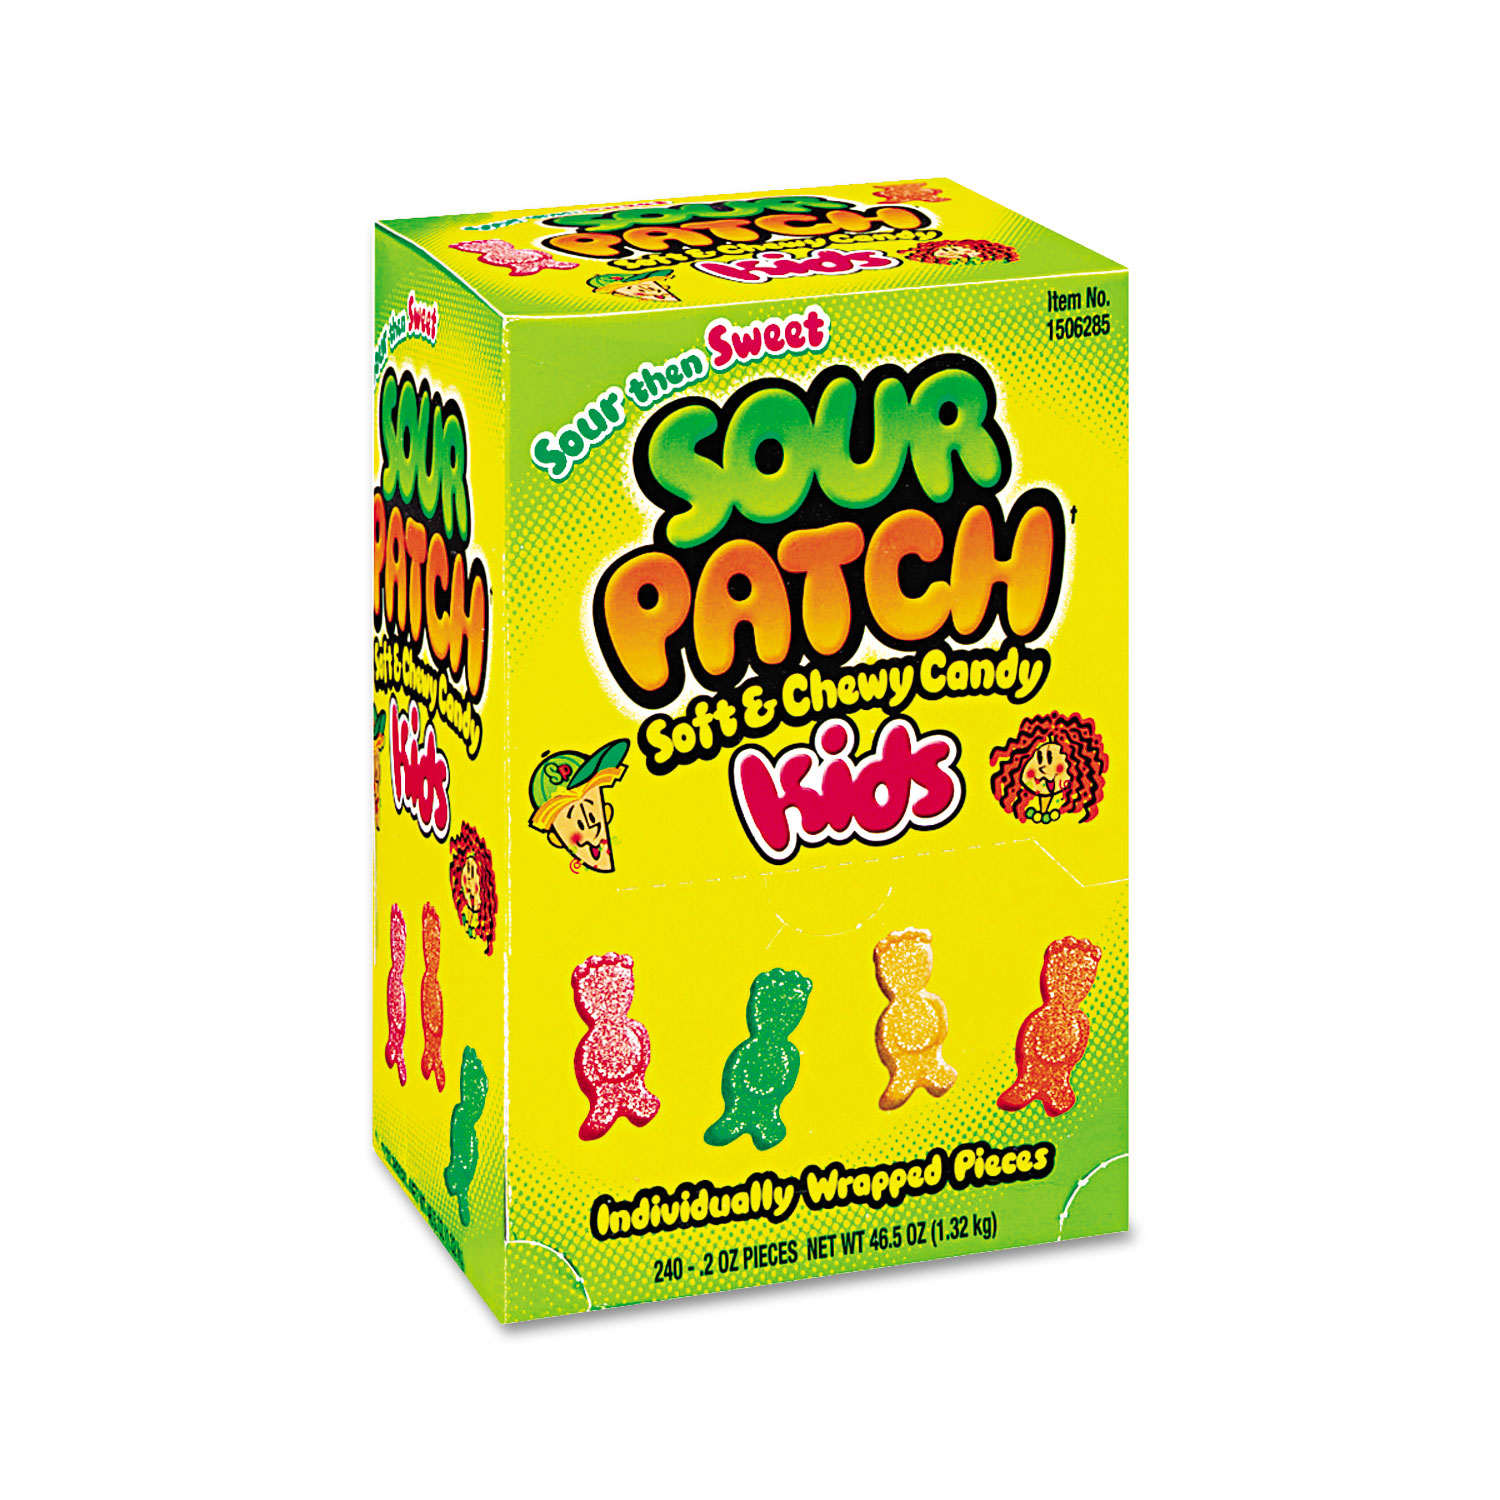 Fruit Flavored Candy, Grab-and-Go, 240-Pieces/Box